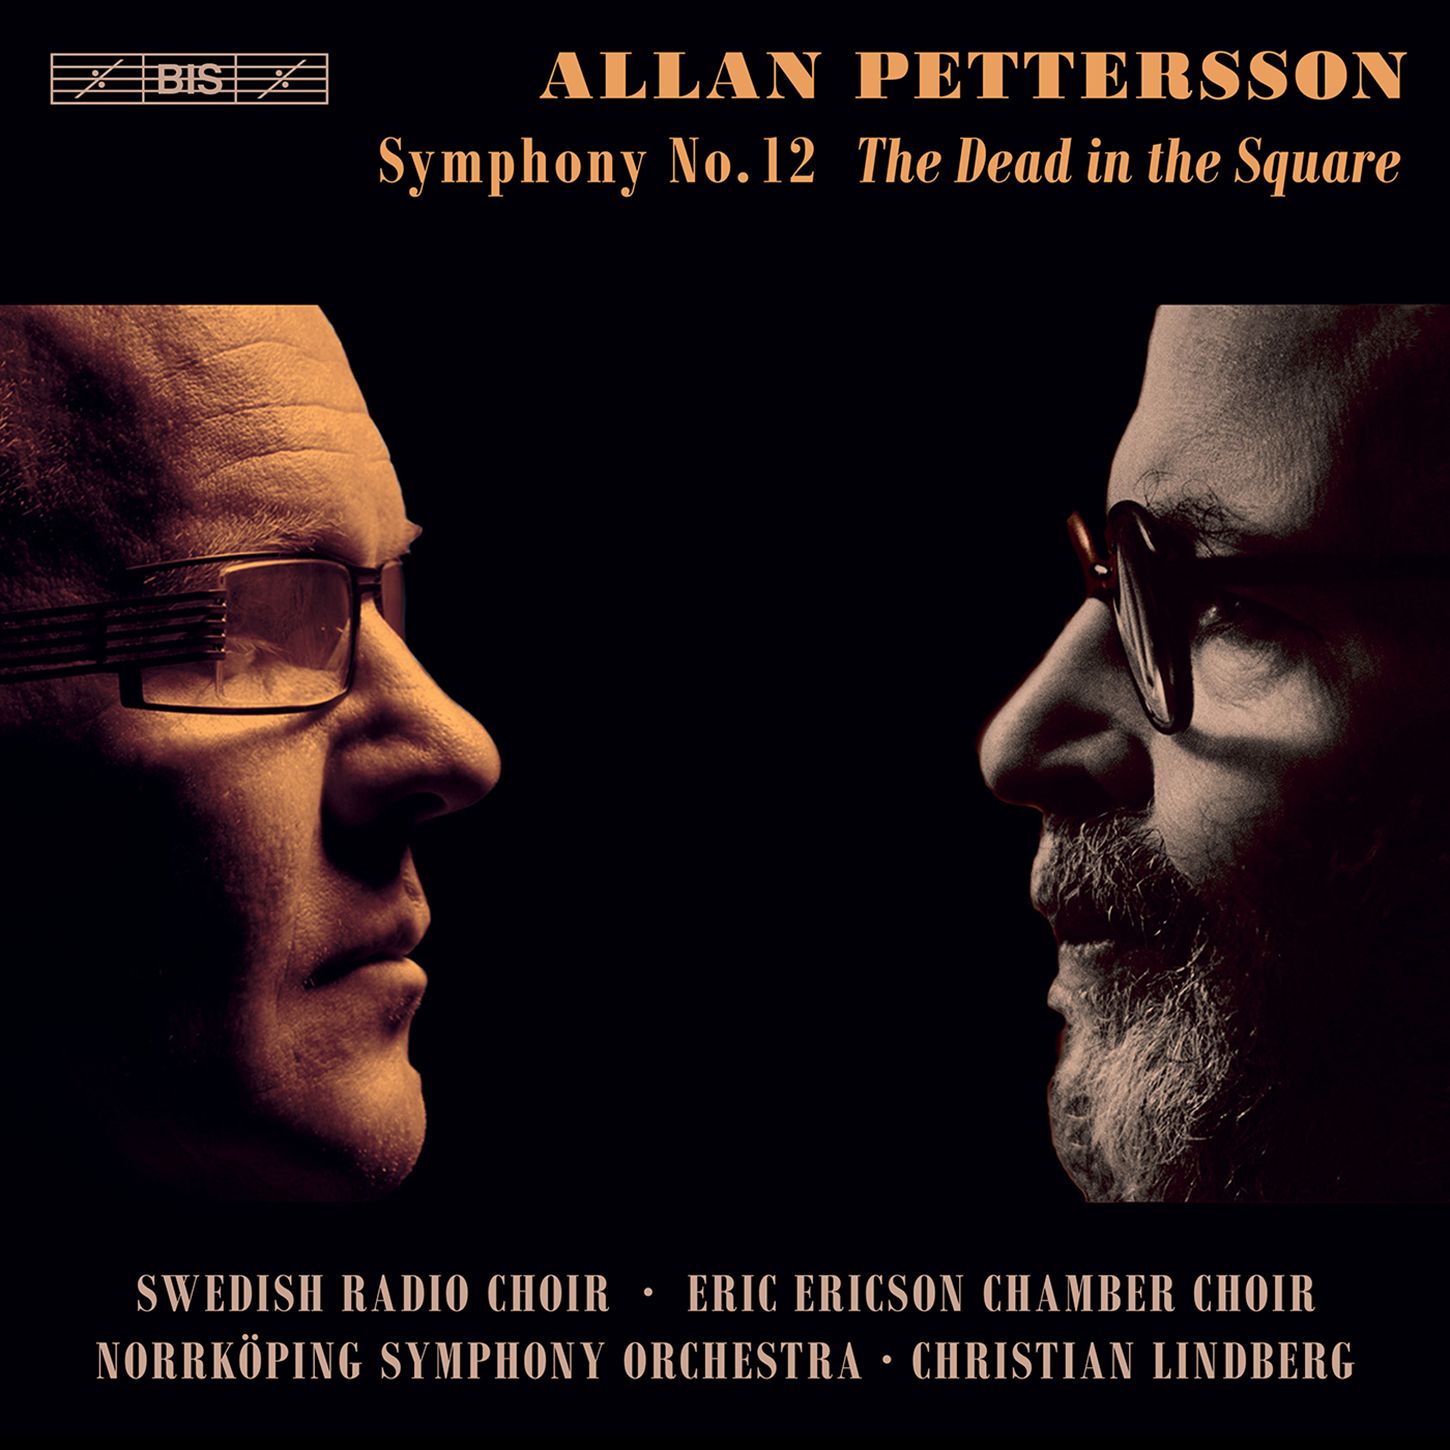 The Dead in the Square: Allan Pettersson's Twelfth Symphony